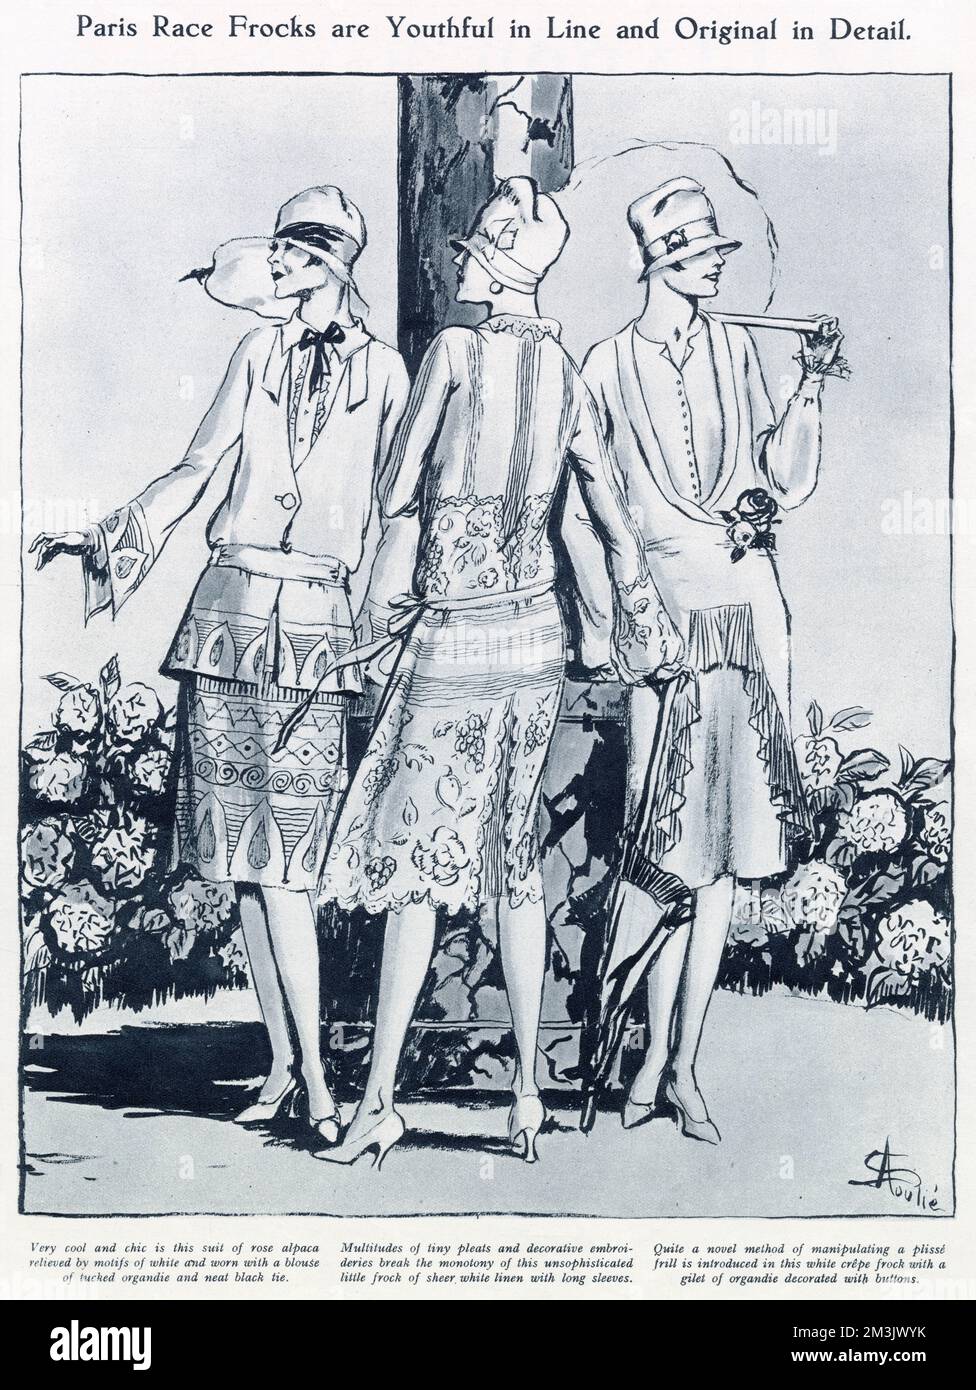 Three stylish dresses, designed for wearing at the races, 1926.  On left: A suit of rose alpaca, embellished with a white motif, worn with a white blouse and a neat black tie.  Centre: A white linen dress decorated with tiny pleats and embroidery.  On right: A white crepe dress with a plisse frill, worn with a gilet of organdie decorated with buttons. Stock Photo